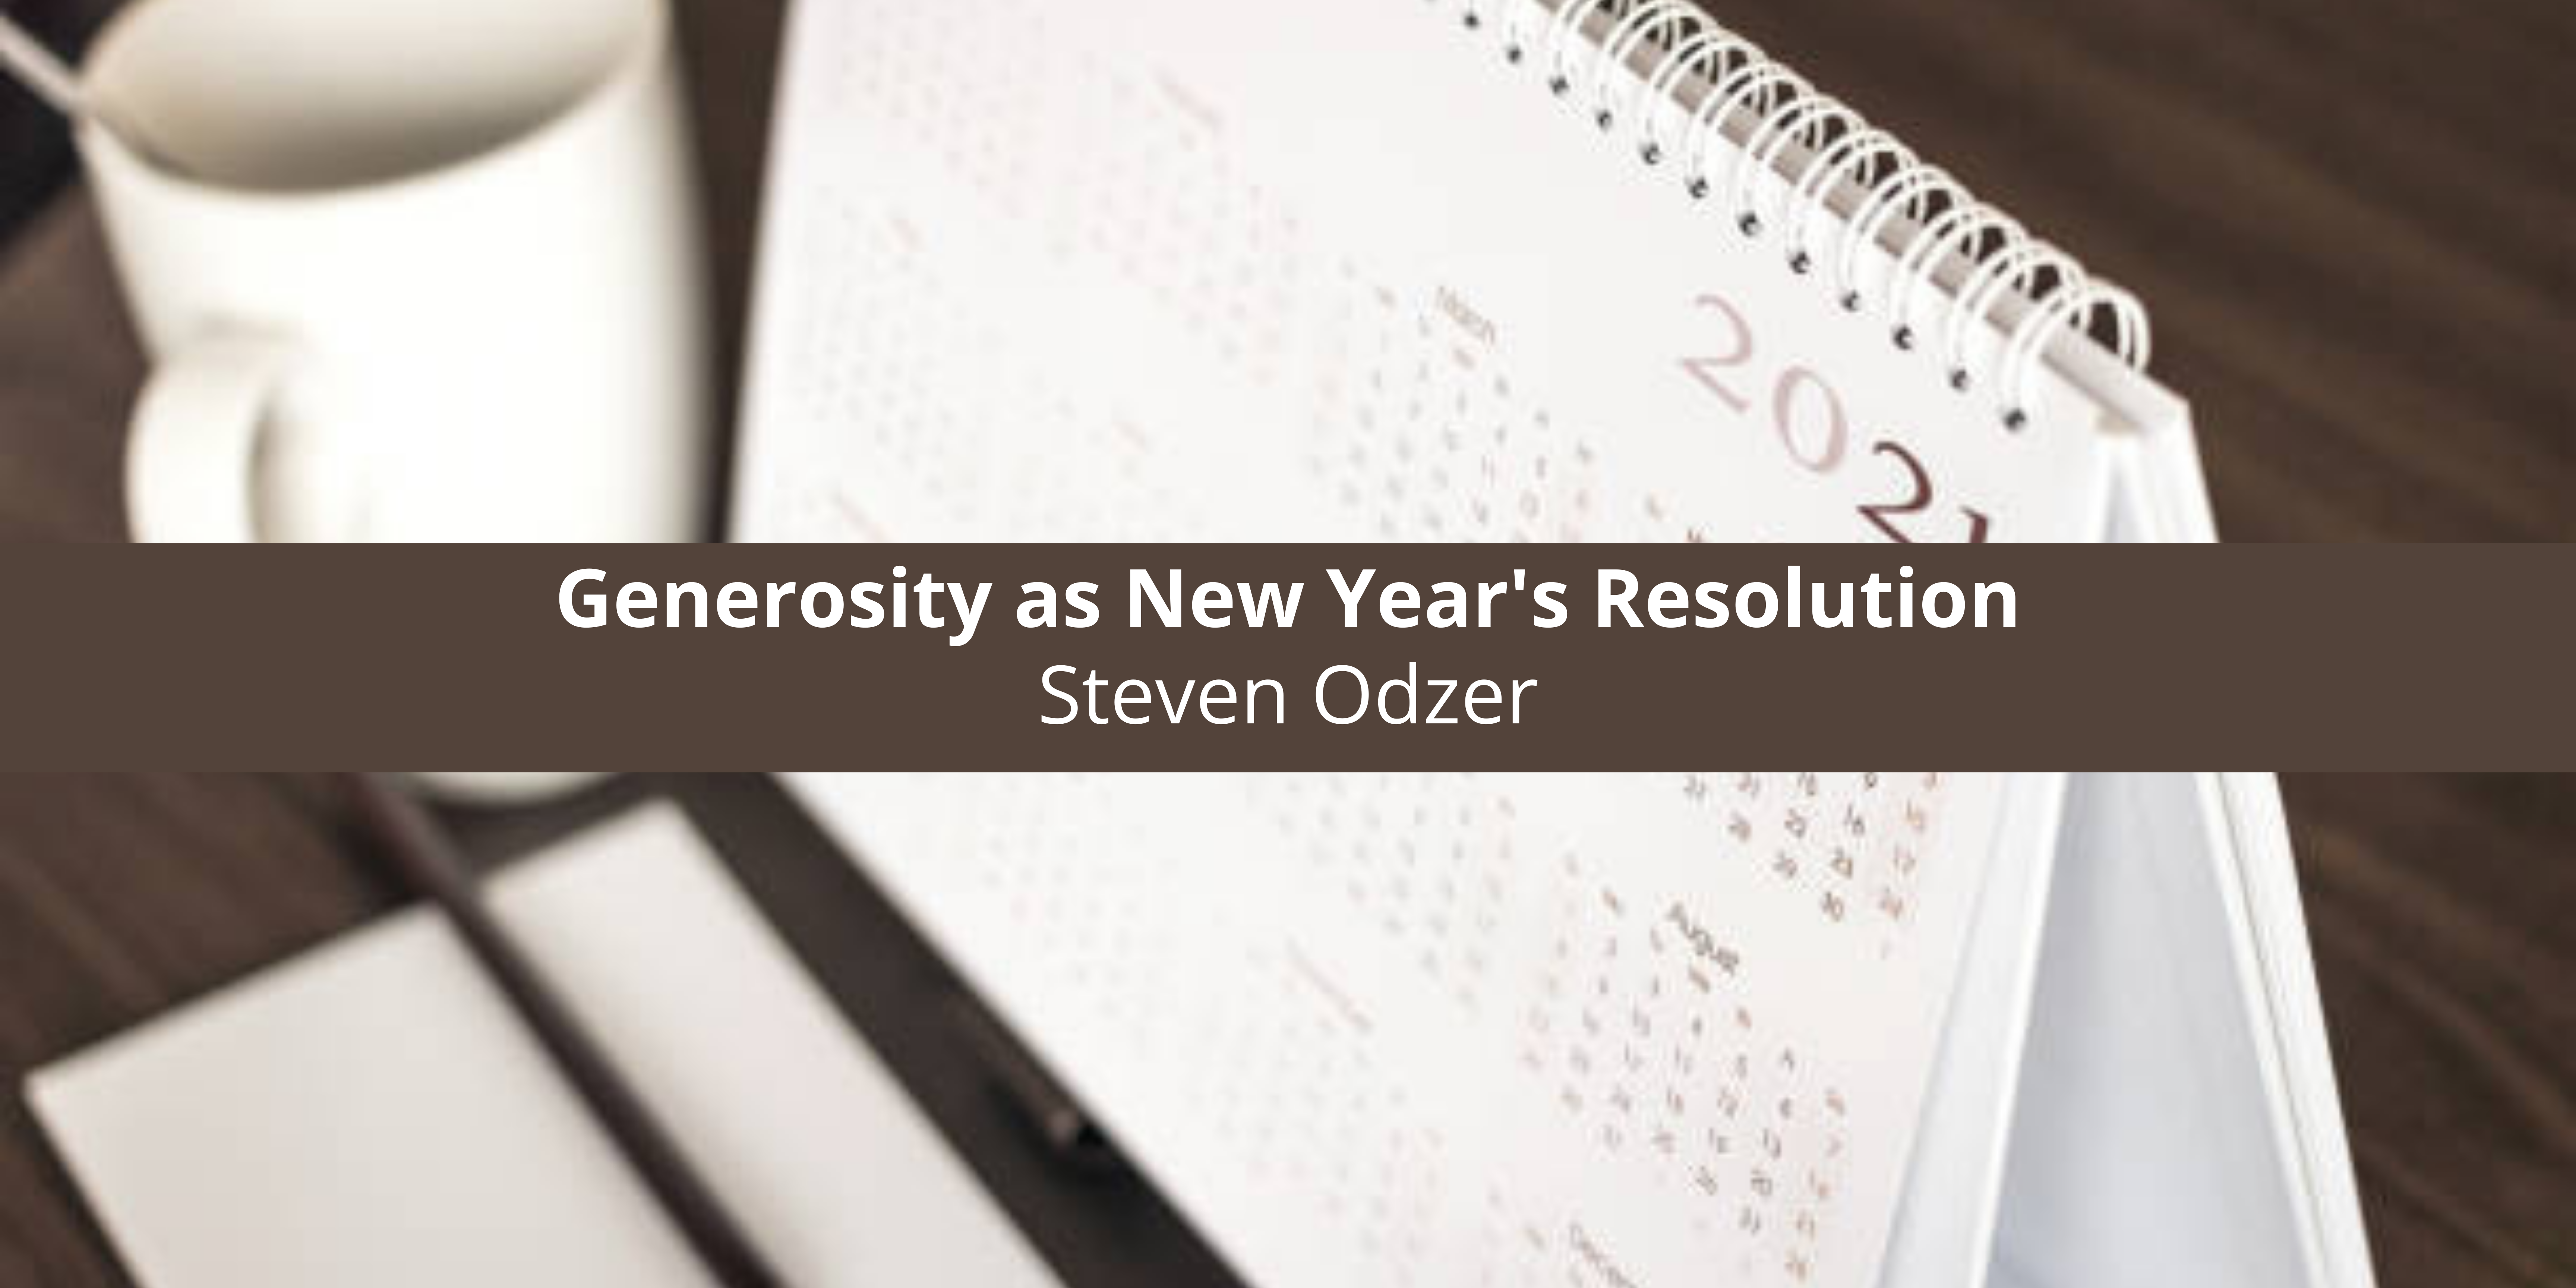 Steven Odzer Recommends Generosity as New Year’s Resolution